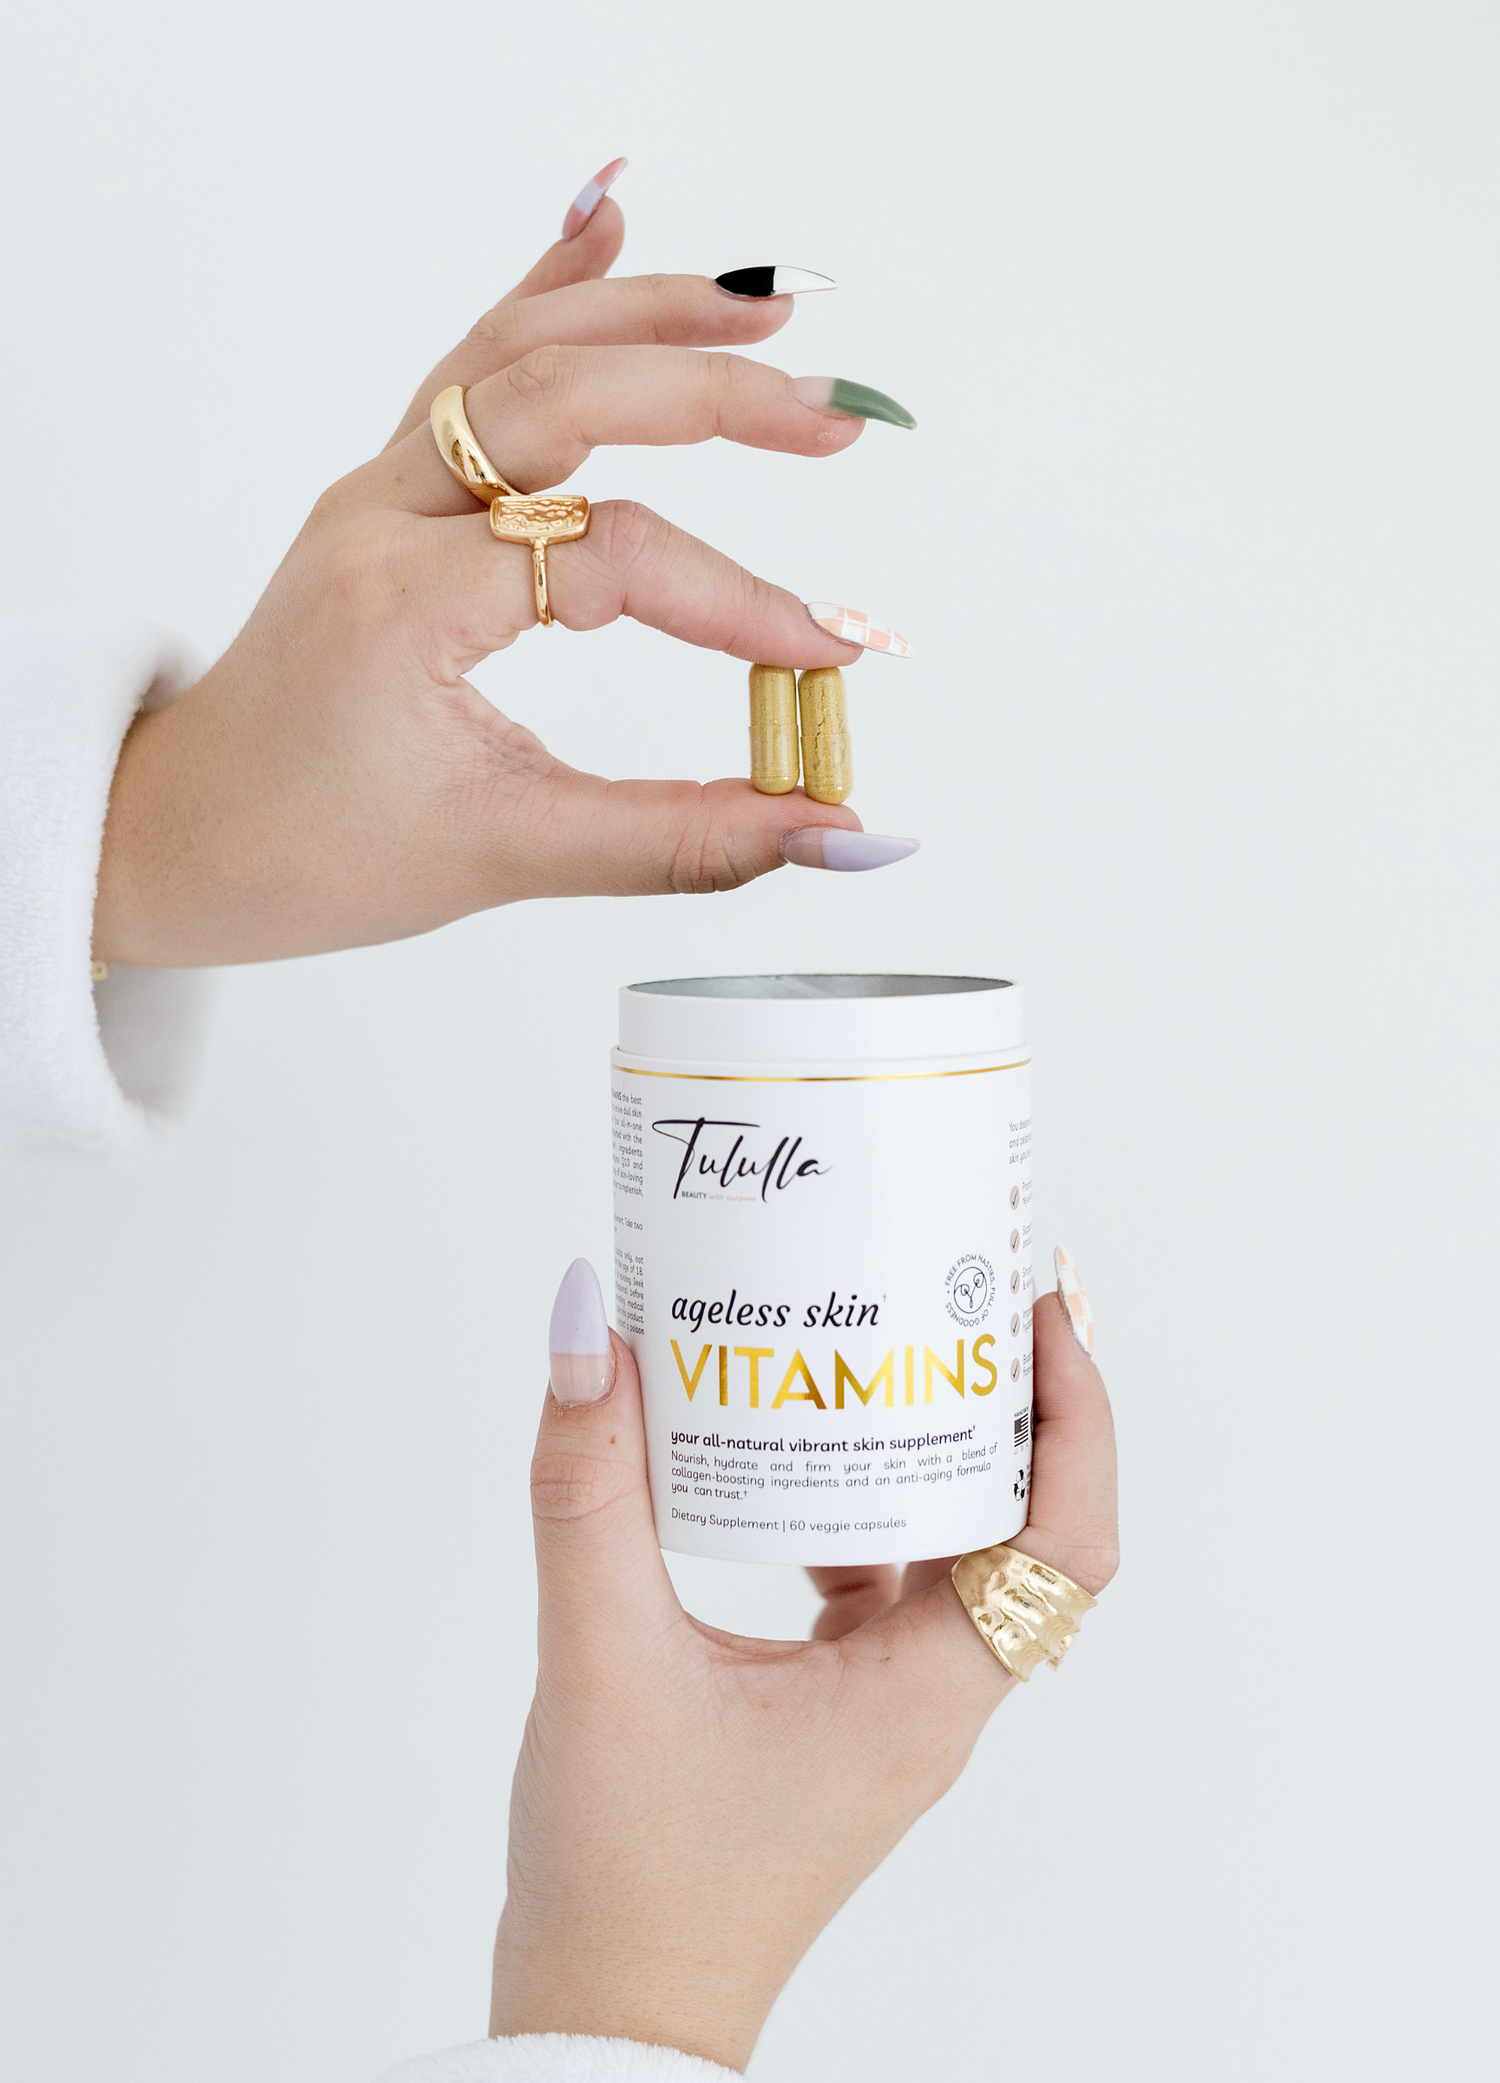 Tululla_ageless_skin_VITAMINS_With_Capsules_In_Hand_Displayed_In_A_Neutral_Setting